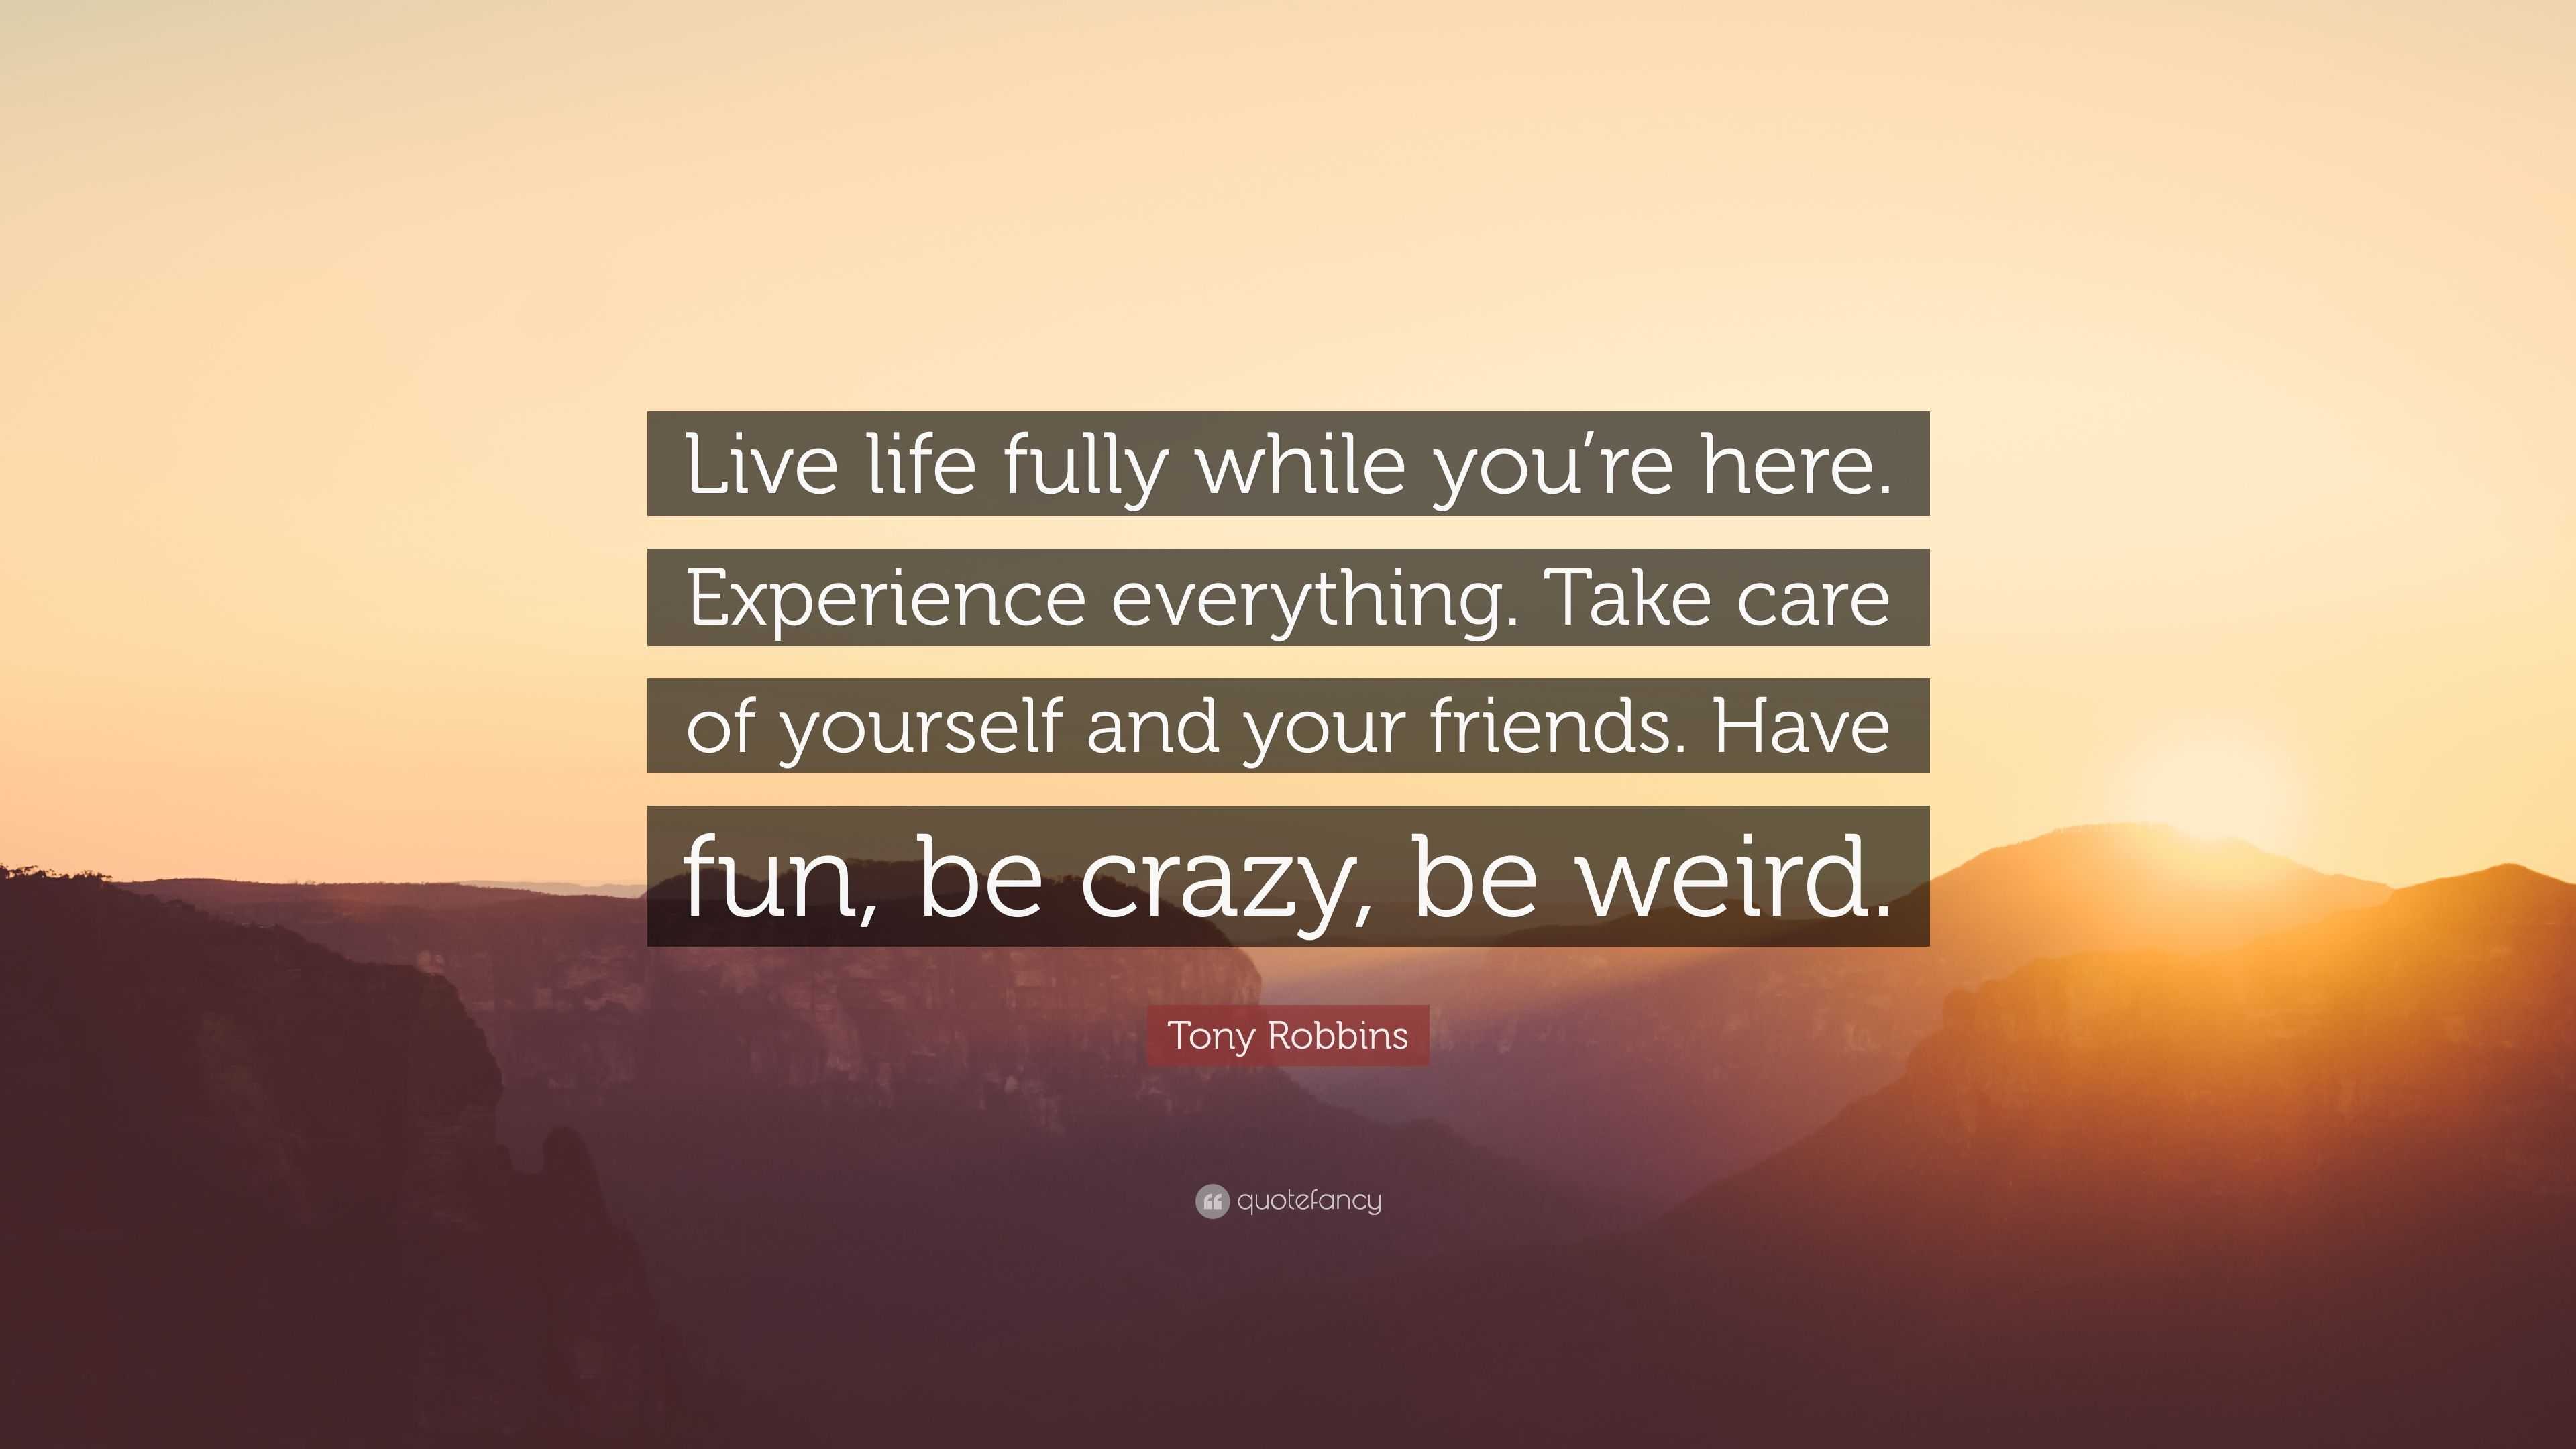 live life and have fun quotes tony robbins quote u201clive life fully while you u0027re here experience